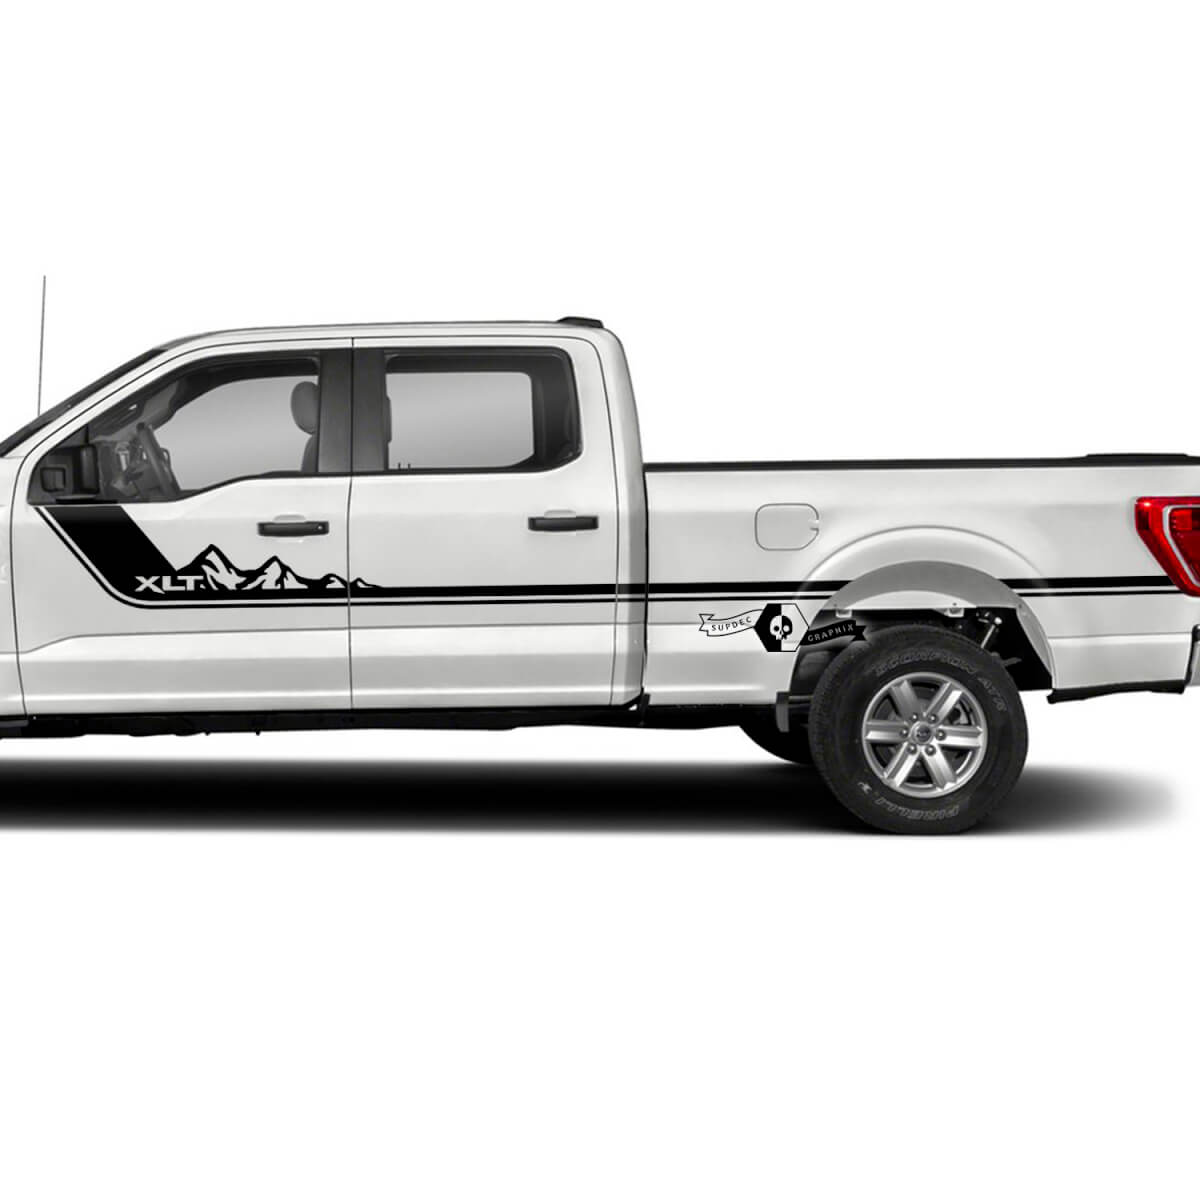 Pair Ford F-150 XLT Side Bed Doors Stripe Mountains F-150 Logo Graphics Side Decals Stickers
